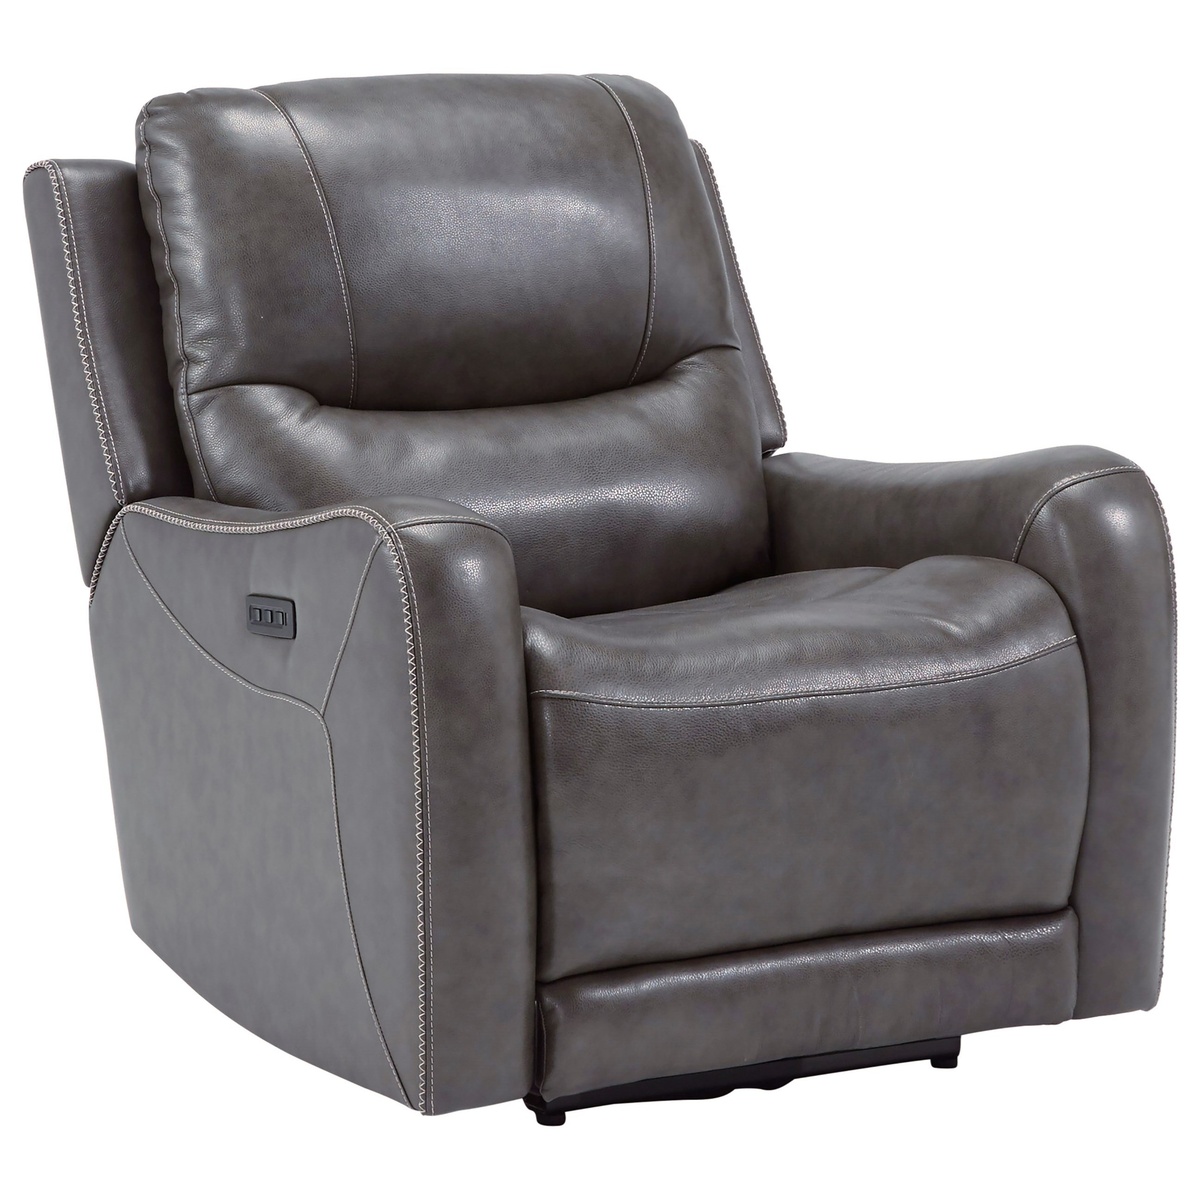 What Is A Zero Wall Recliner Mean